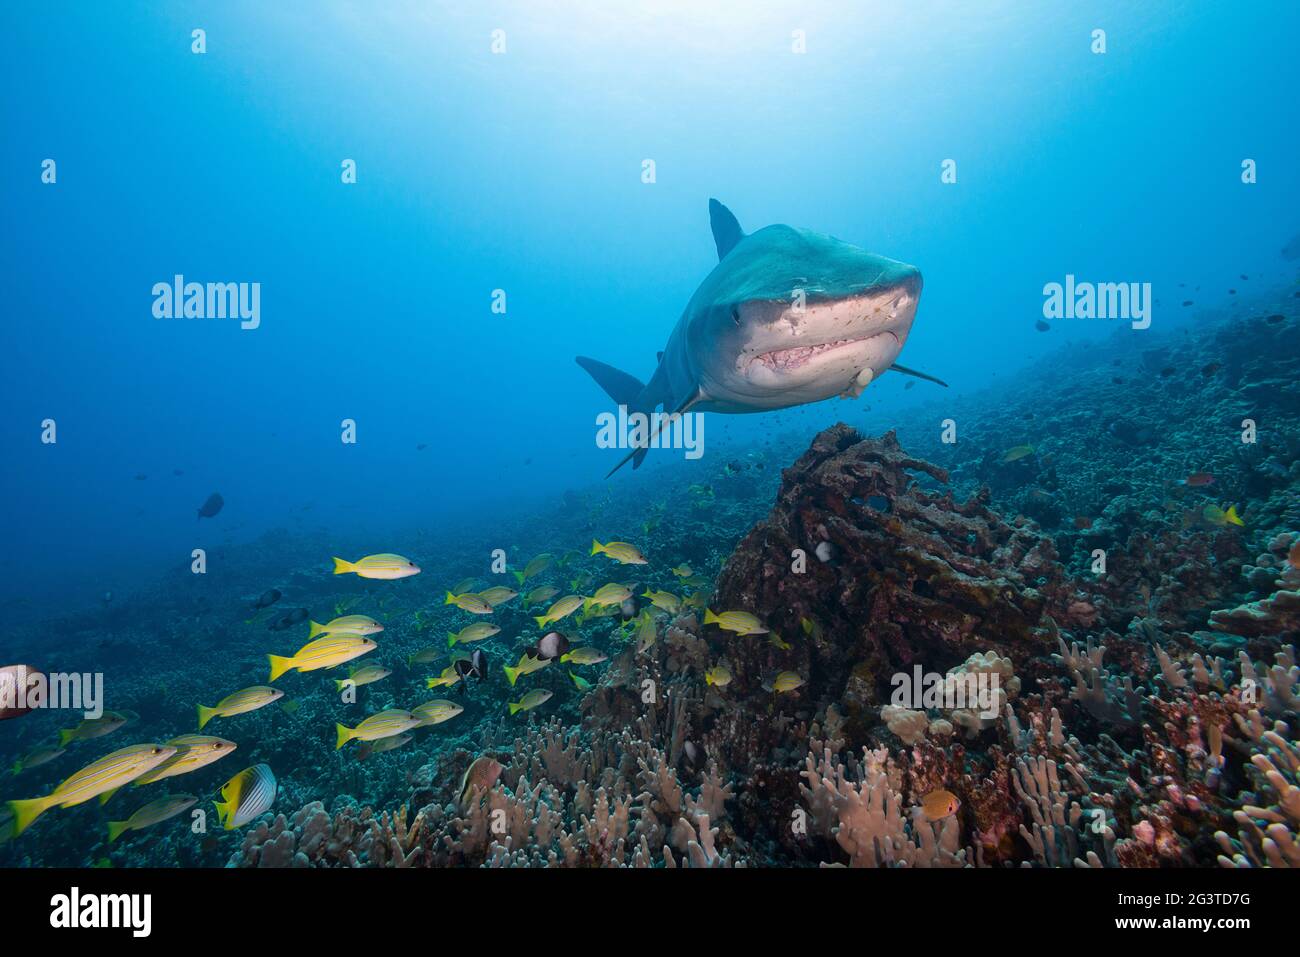 large female tiger shark, Galeocerdo cuvier, with crooked jaw from fishing interaction & a remora or sharksucker, and bluestripe snapper, Kona, Hawaii Stock Photo